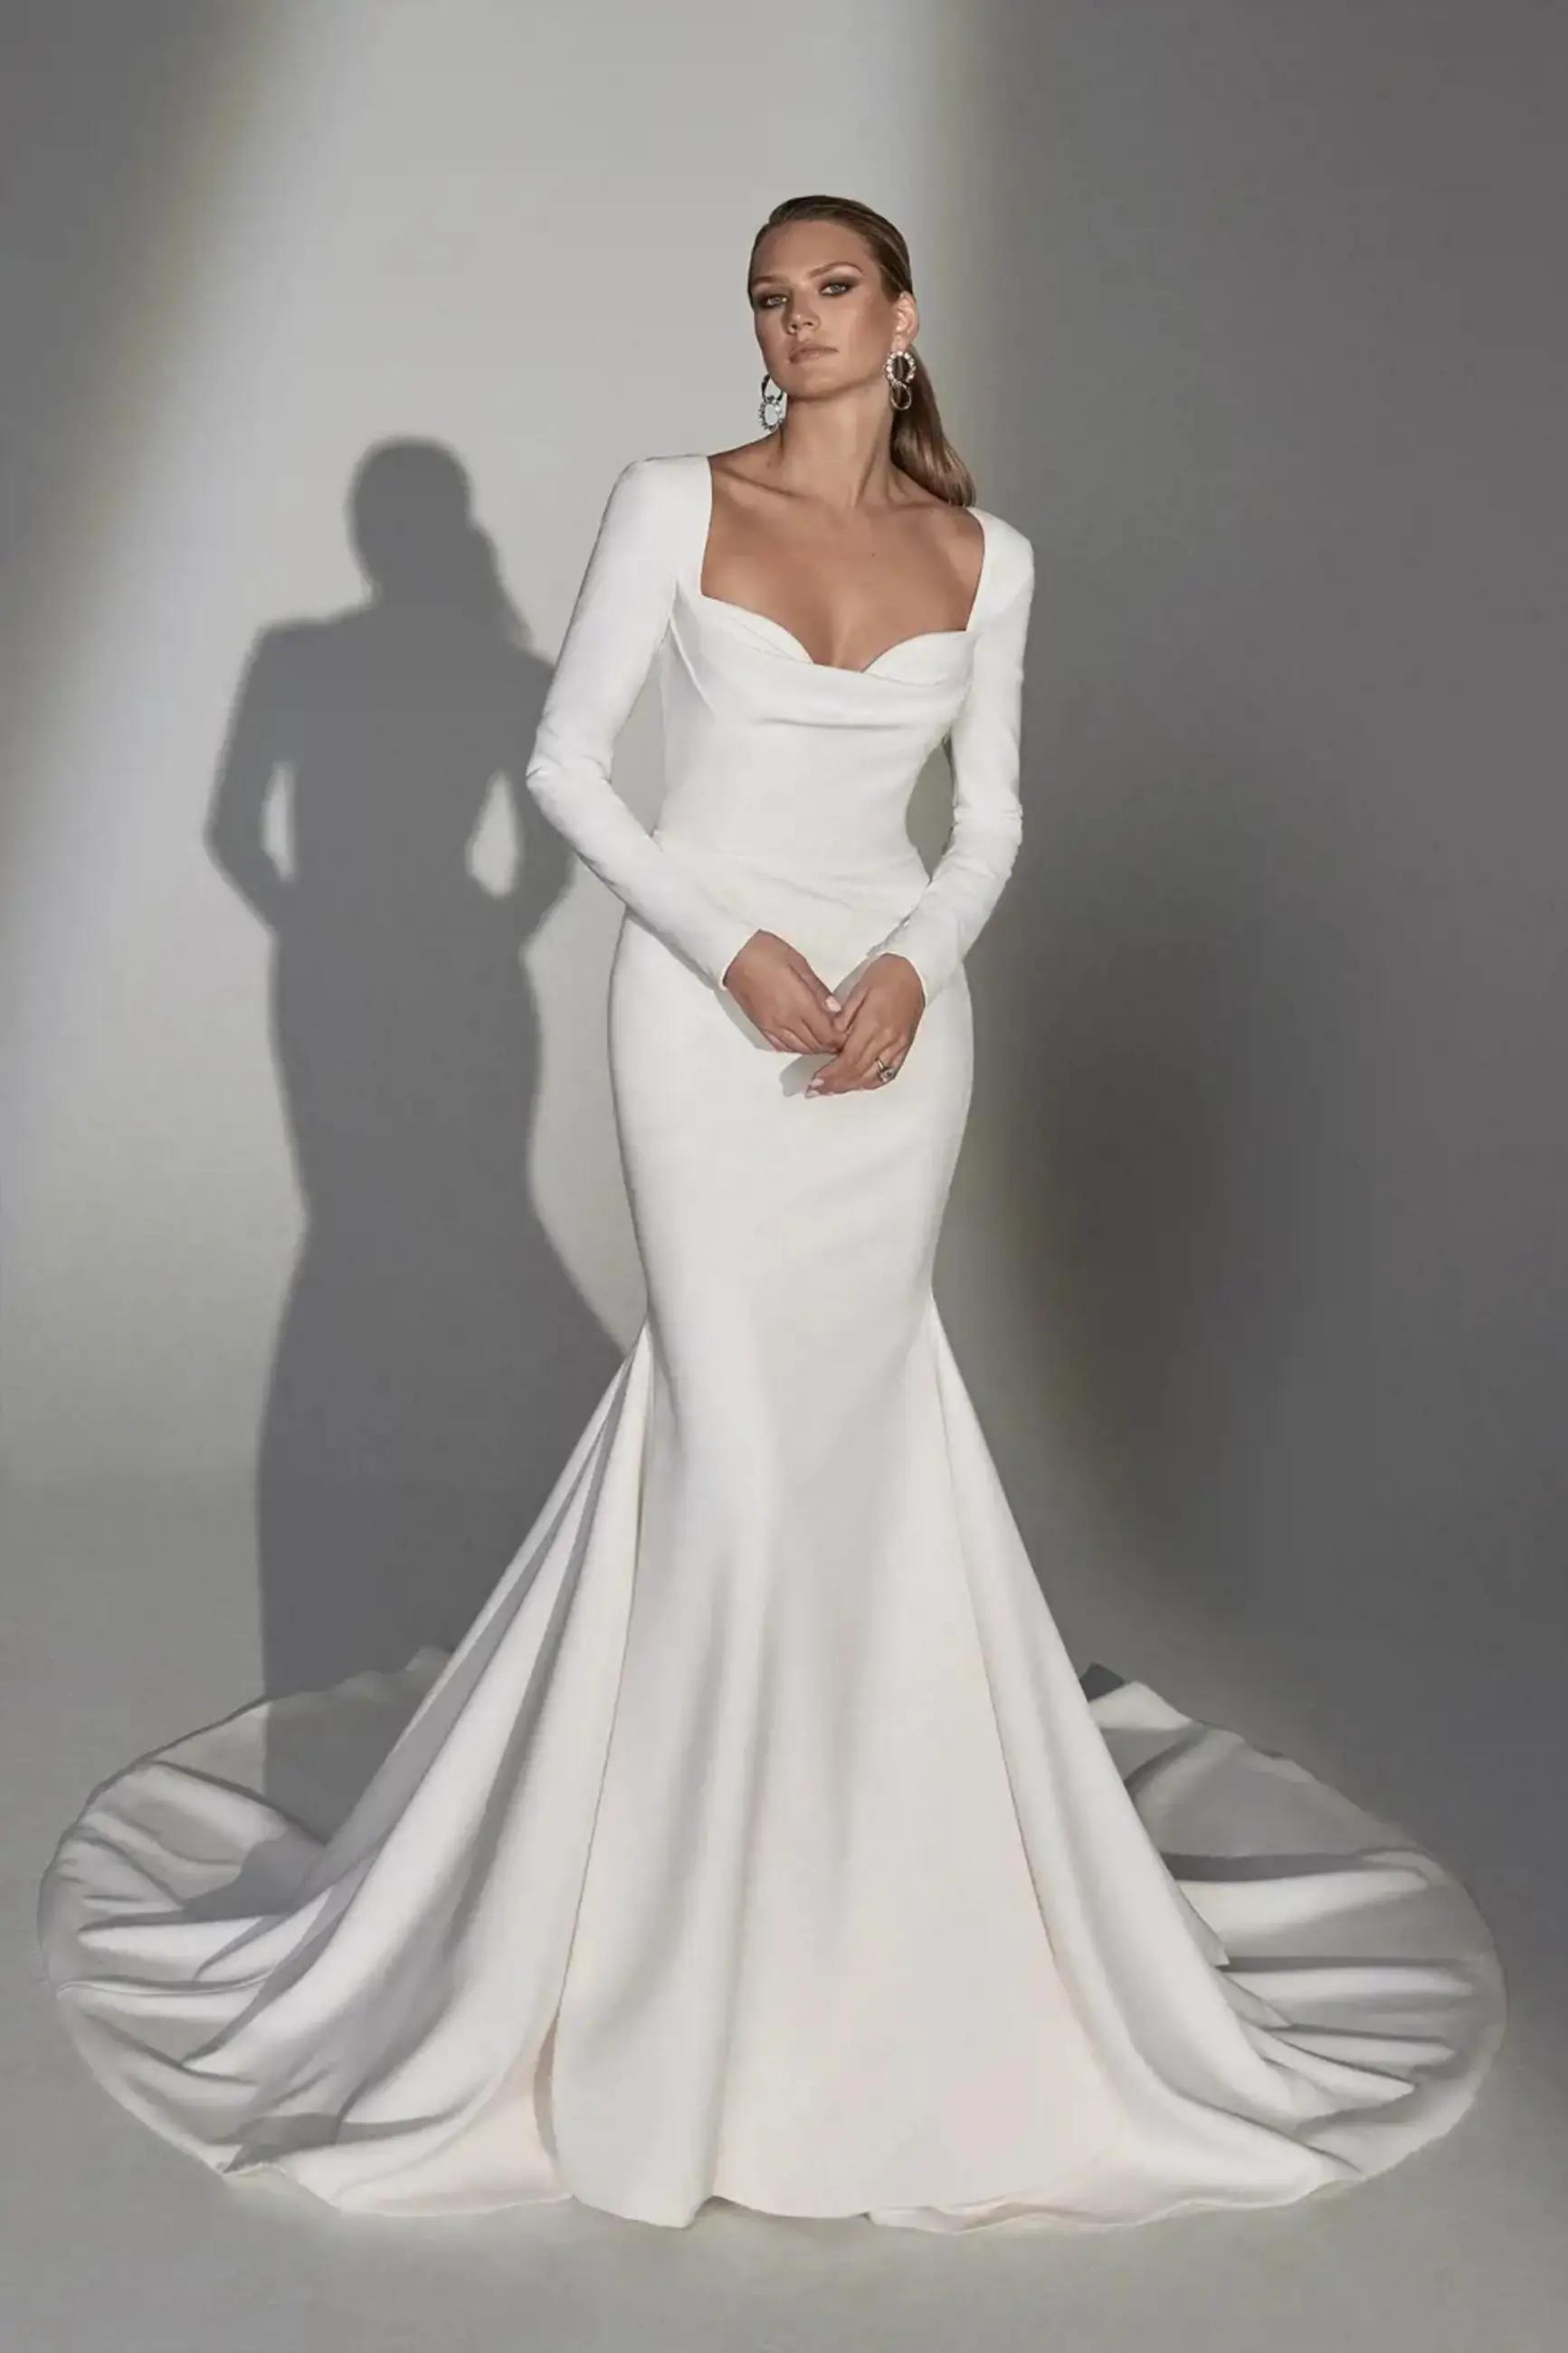 Achieve the Perfect Bridal Look with Justin Alexander Wedding Gowns Image